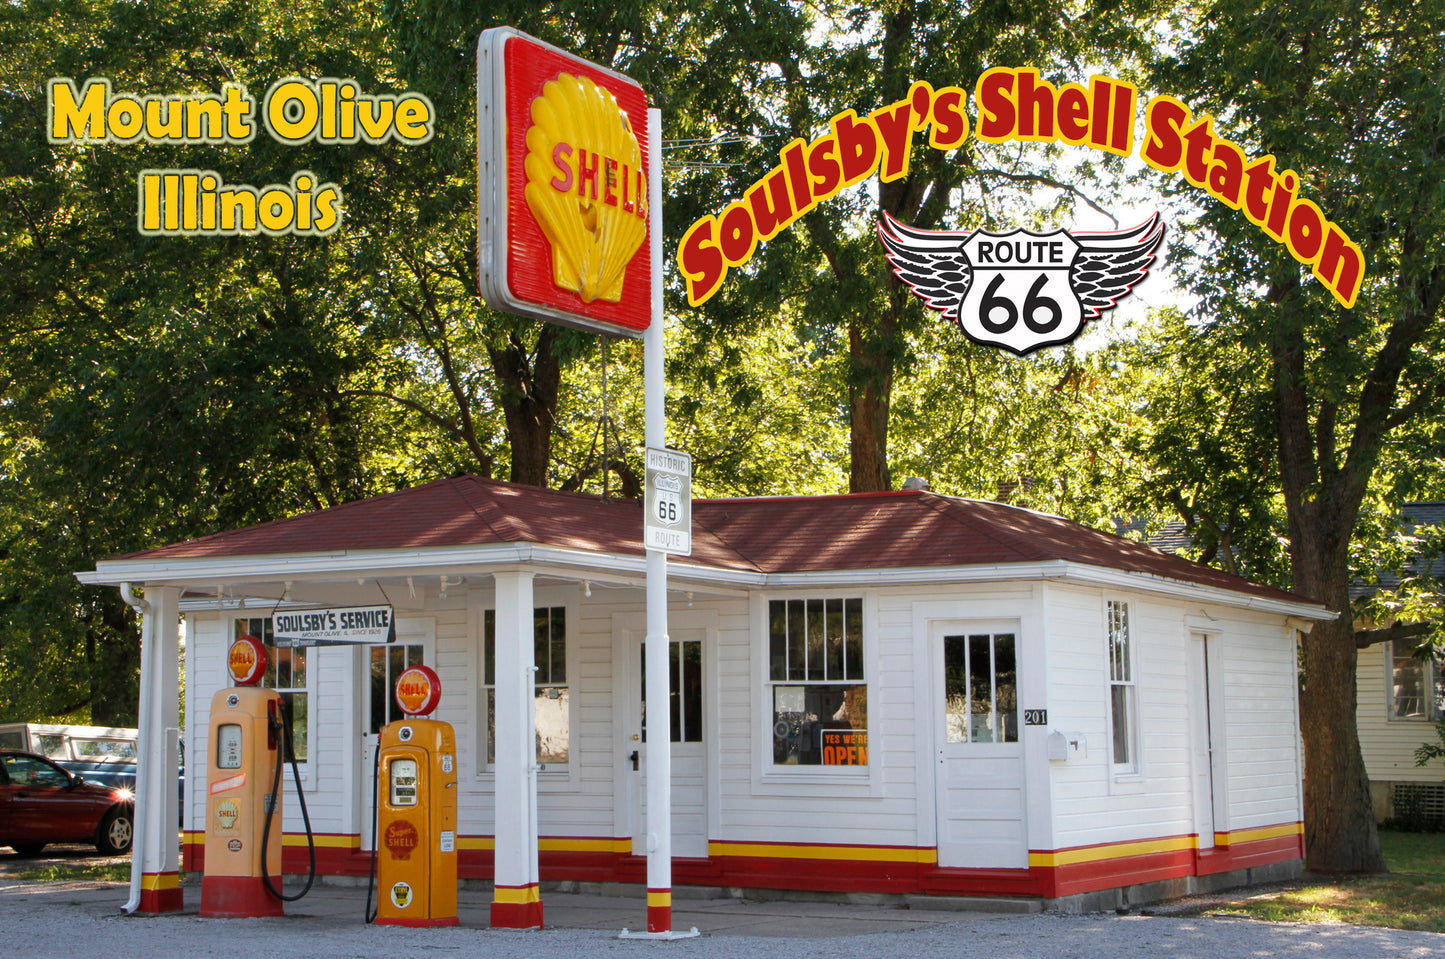 Route 66 Soulsby's shell station  route 66 magnet station route 66 collectible